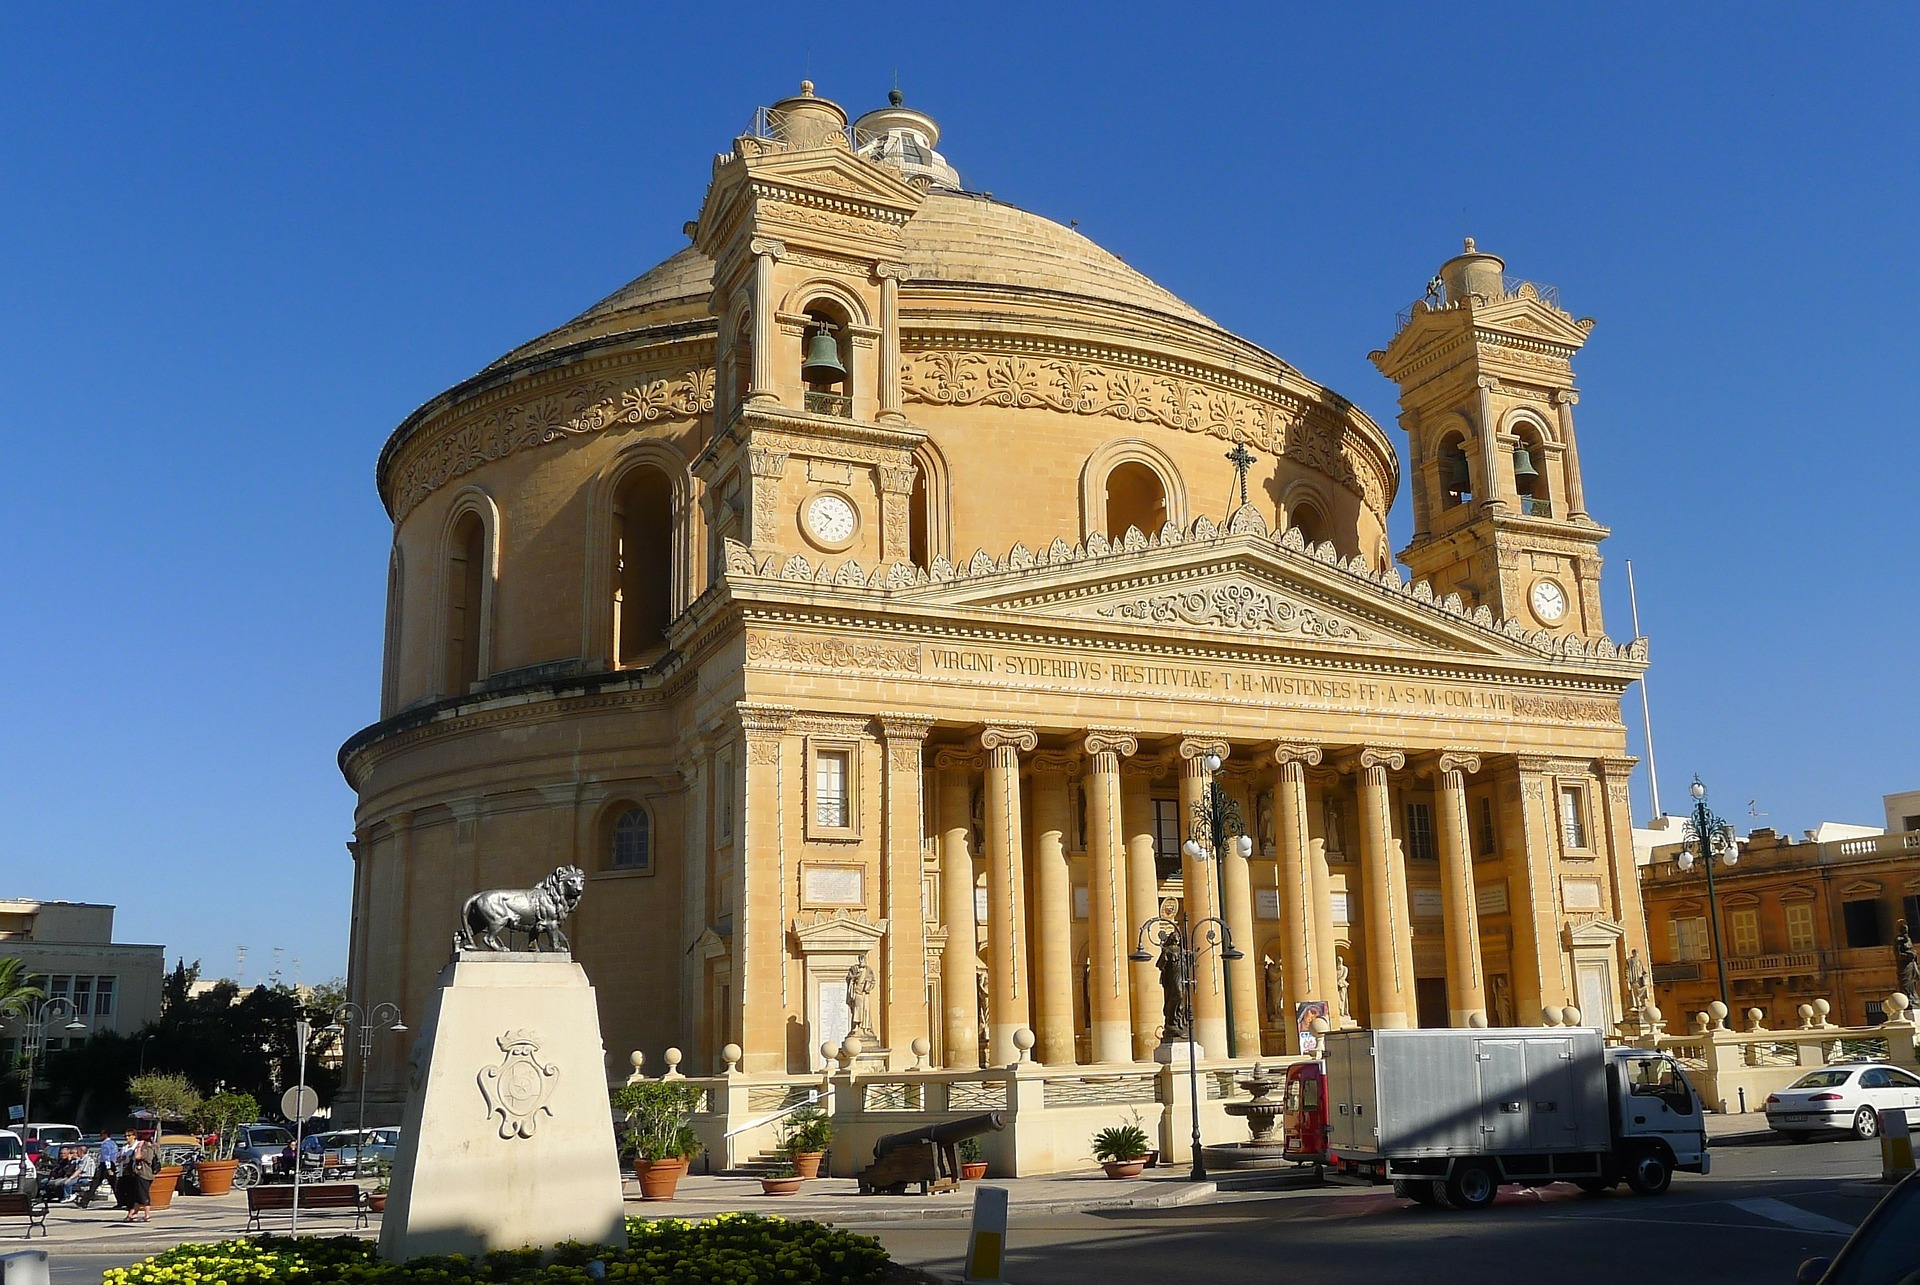 A large clock tower building in Malta.